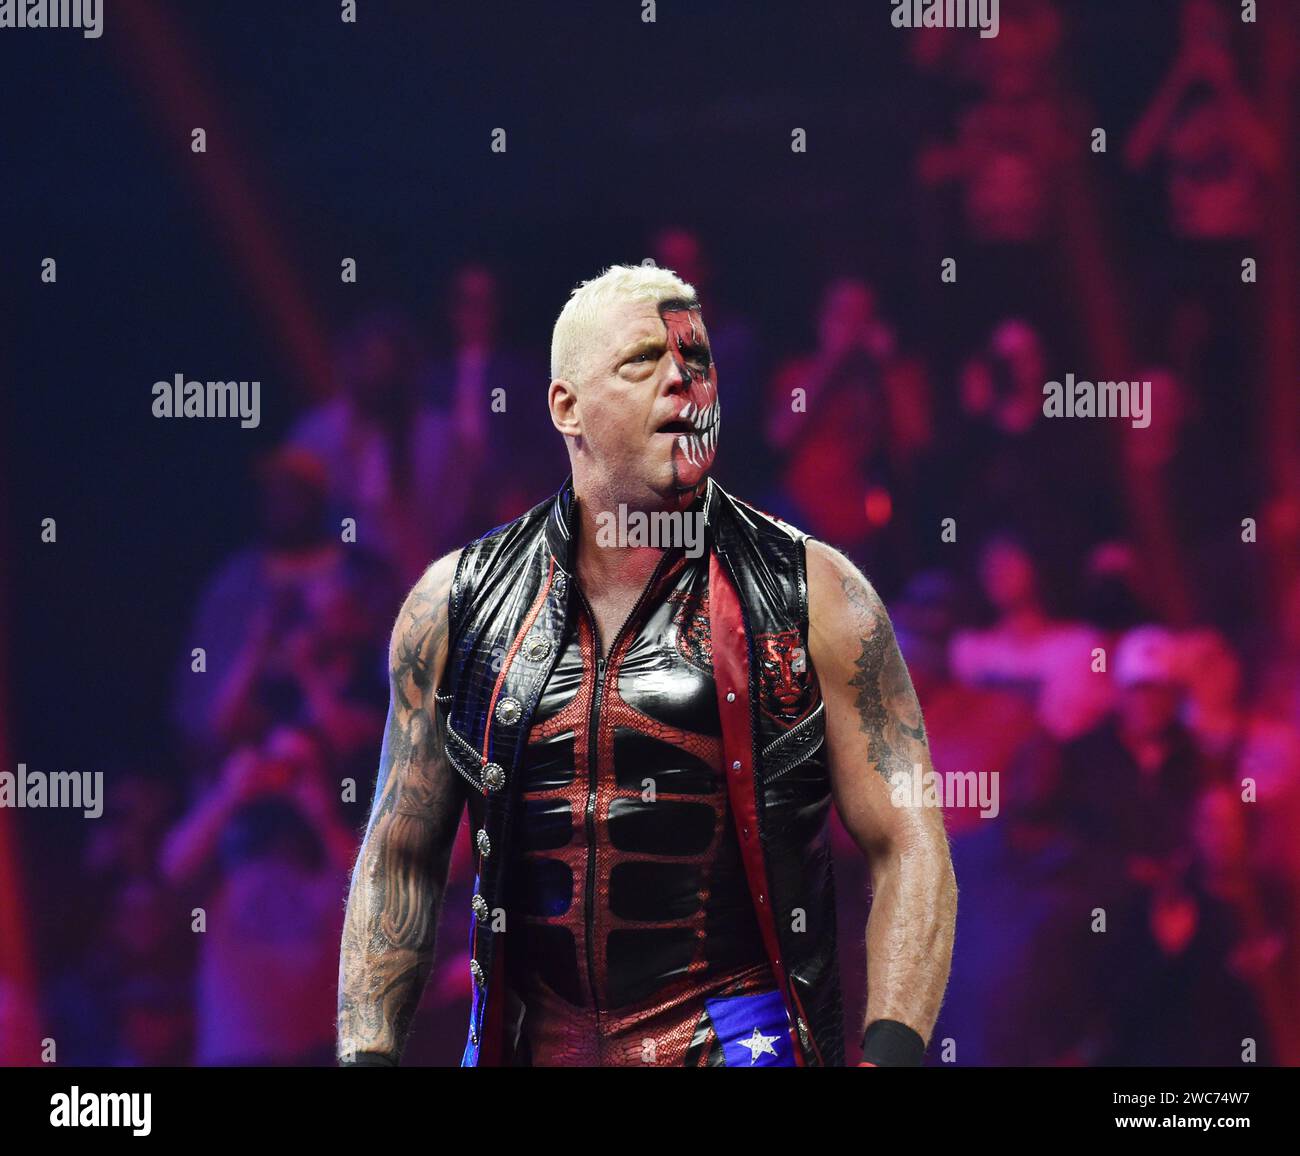 Update On Dustin Rhodes' Future With AEW